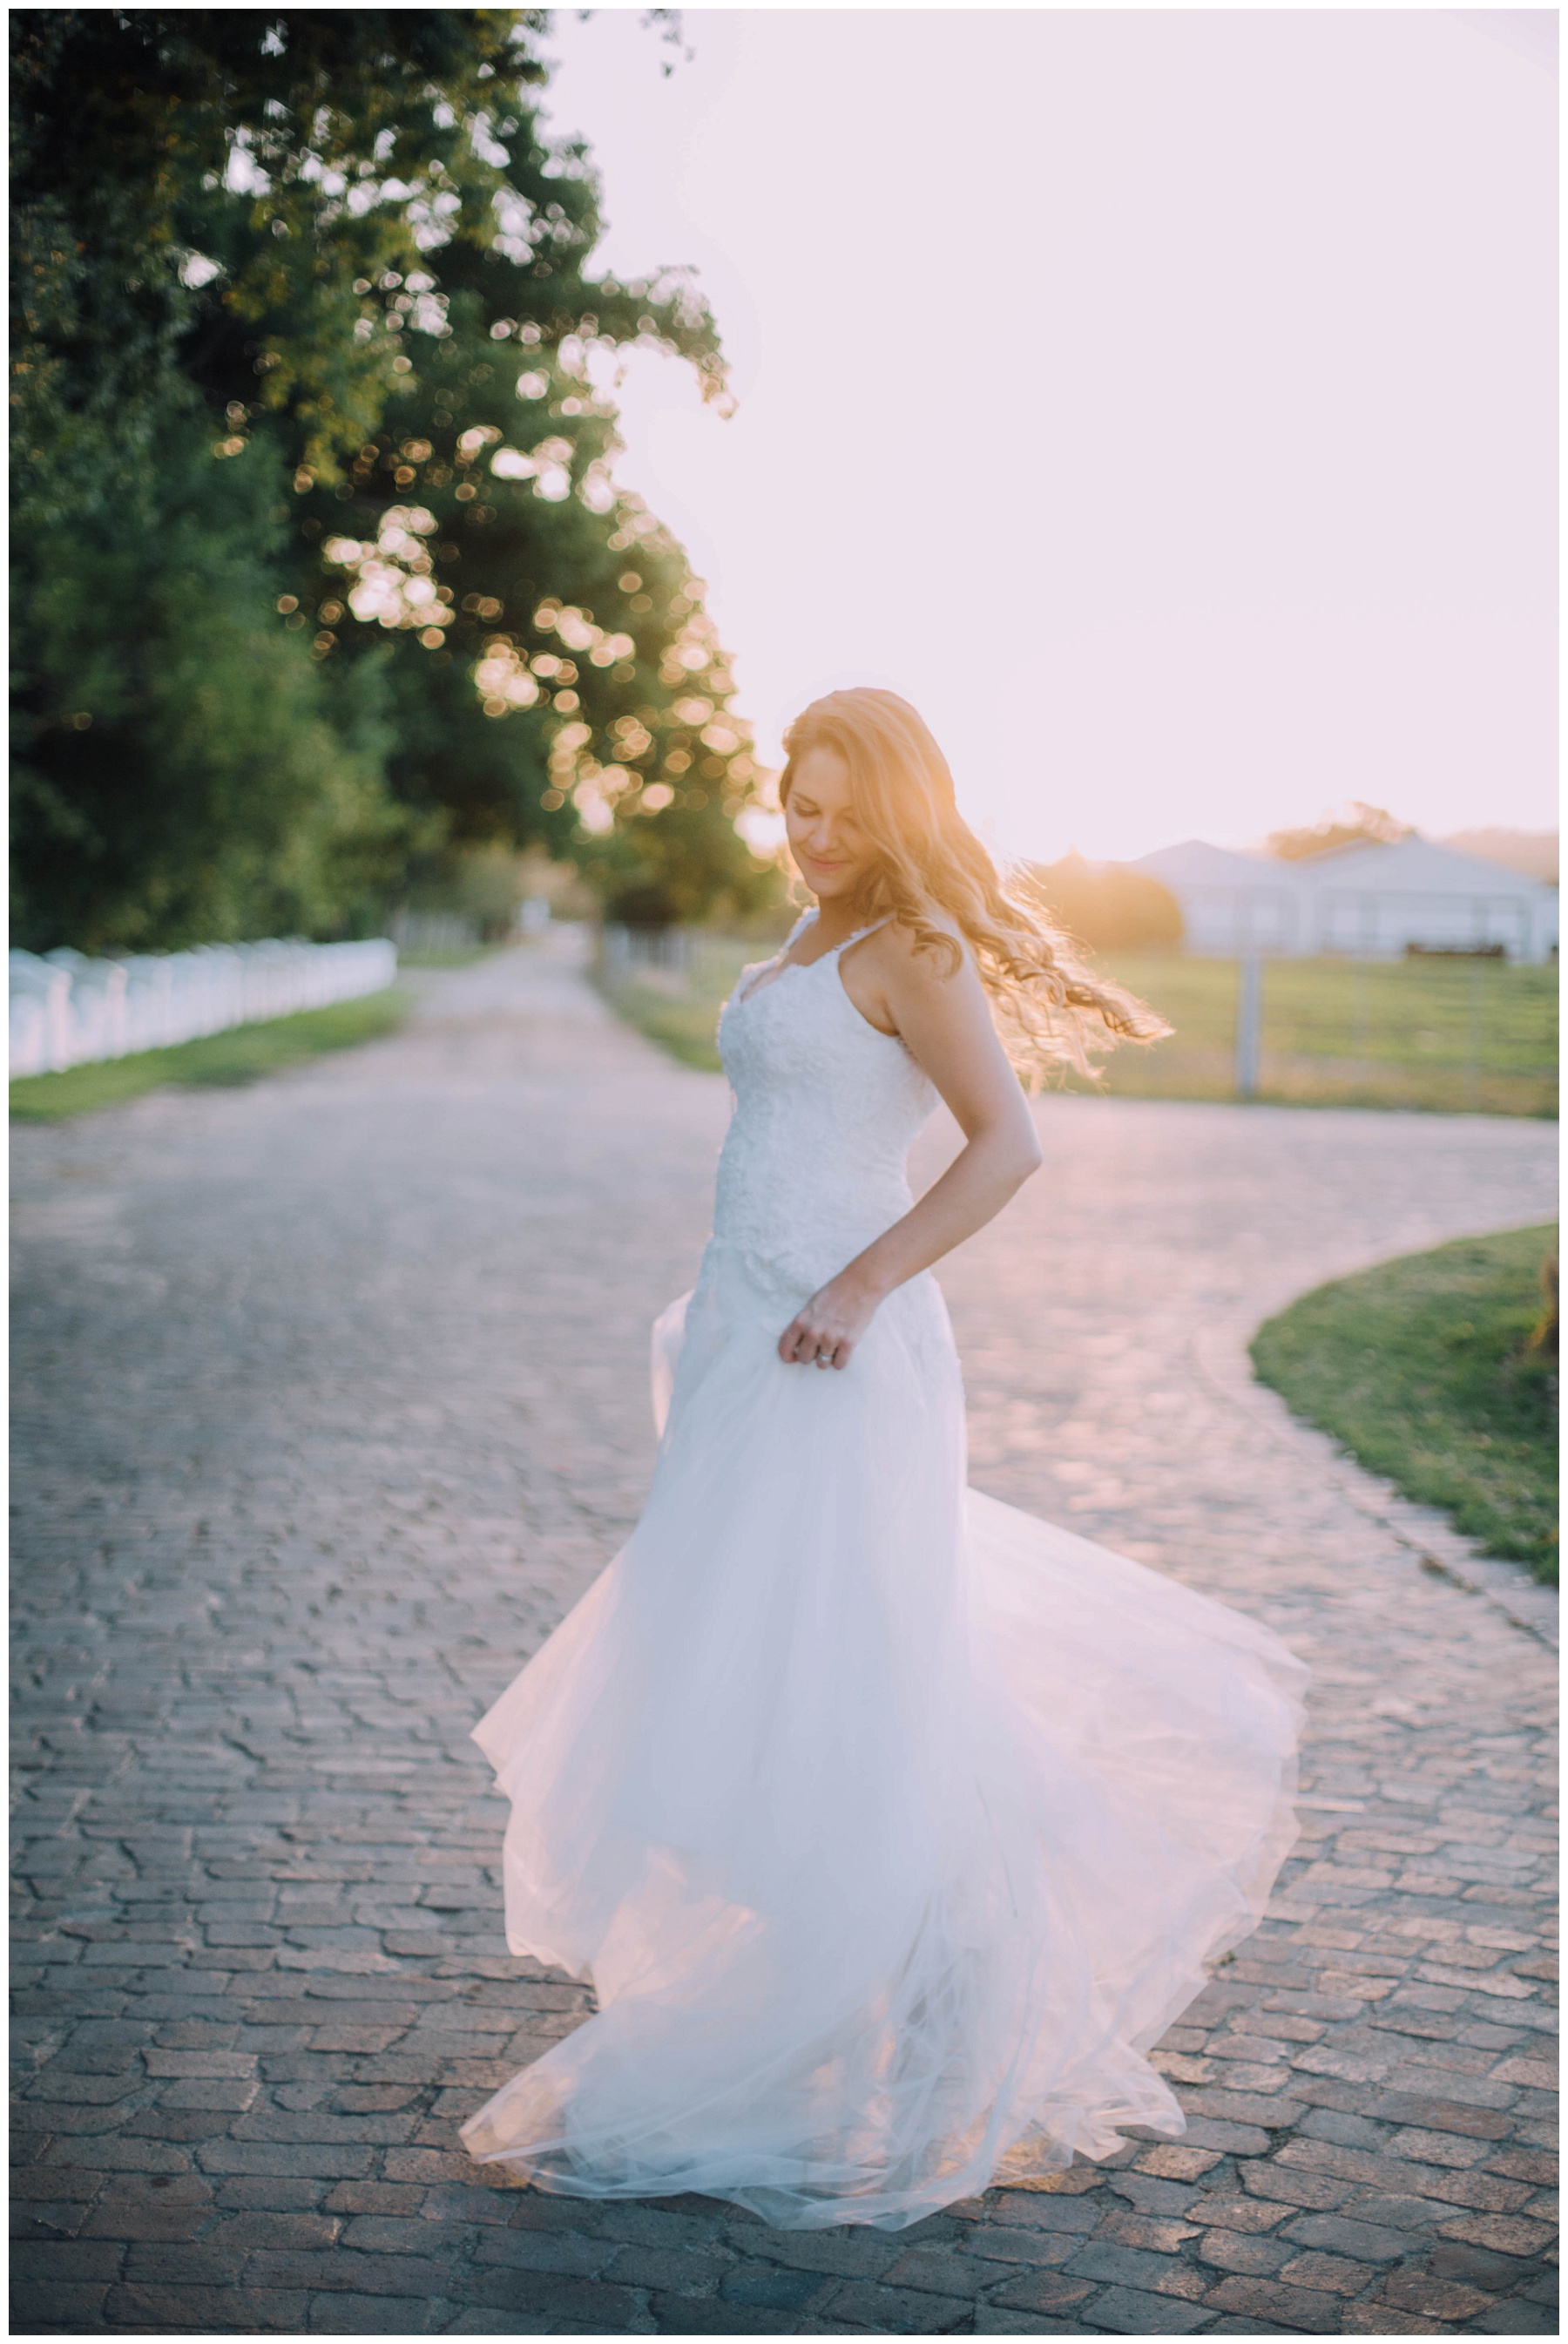 Ronel Kruger Cape Town Wedding and Lifestyle Photographer_8853.jpg